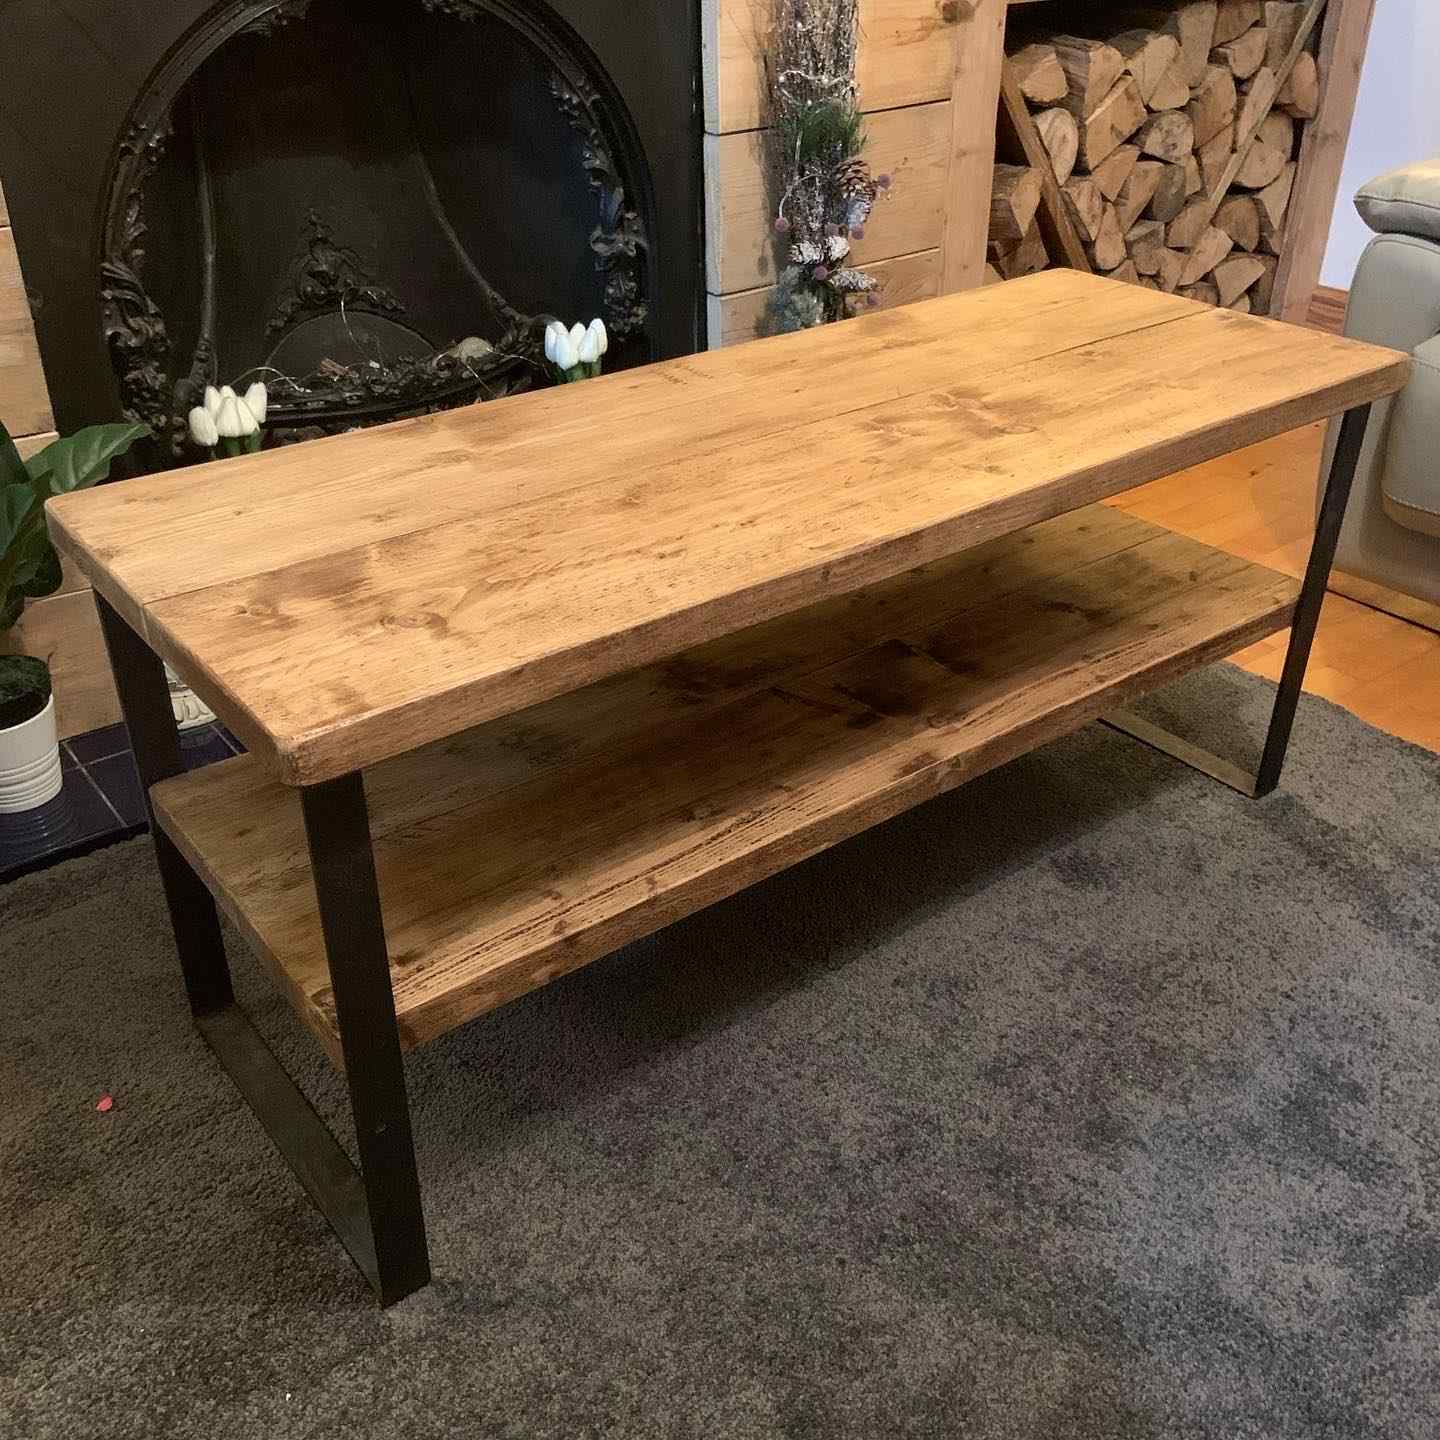 handmade wooden table with shelf